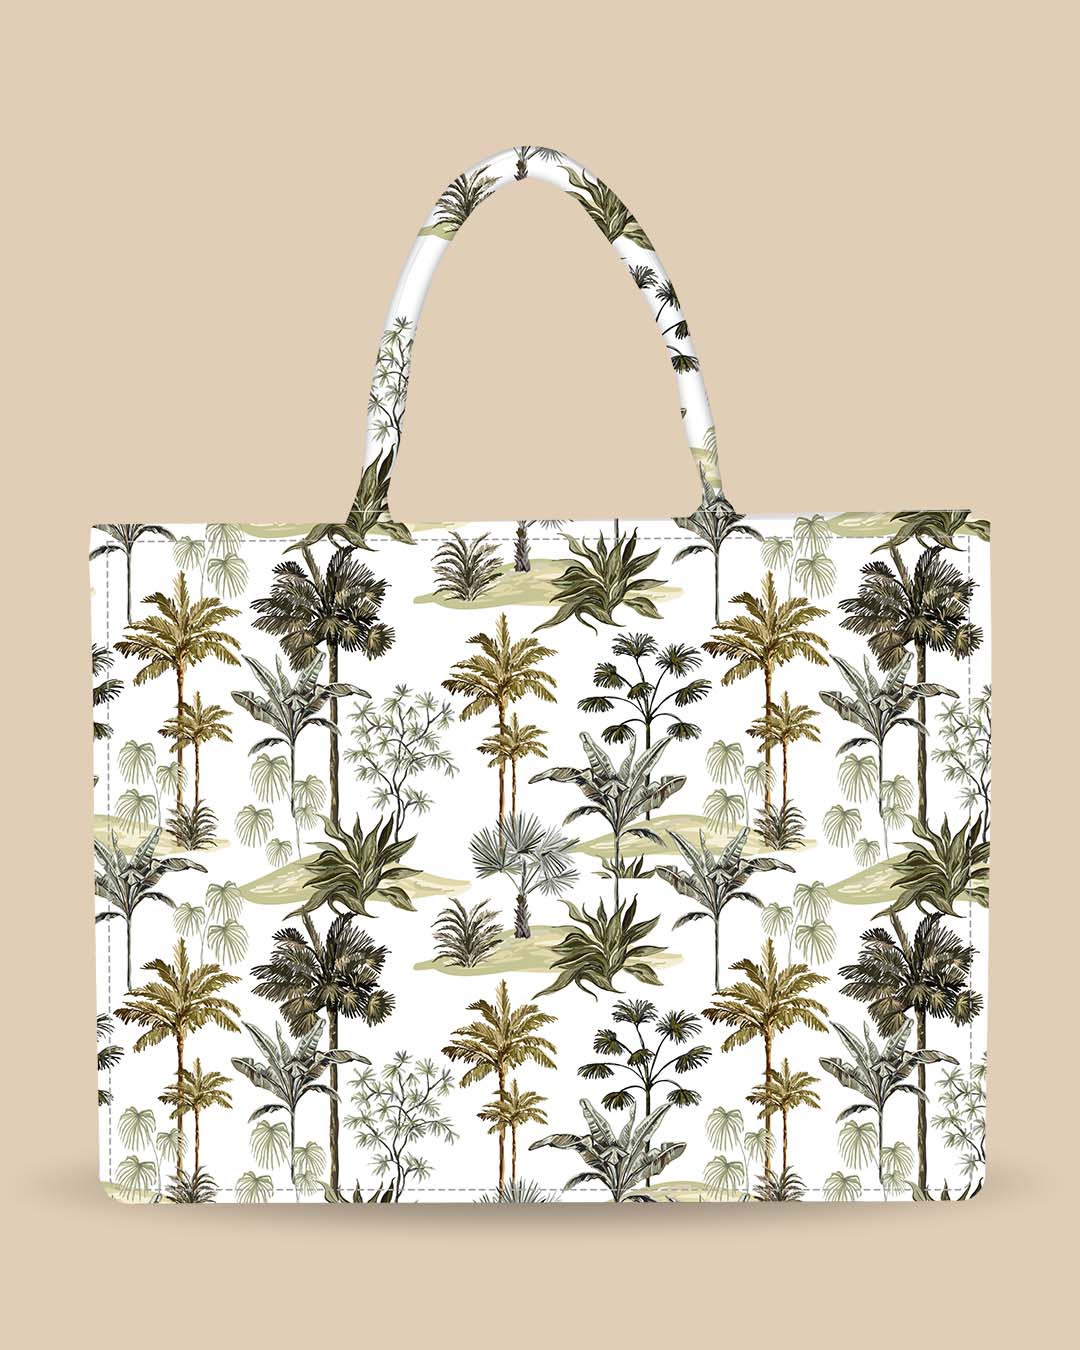 Customized Tote Bag Designed With Tropical Vintage Hawaiian Palm Trees